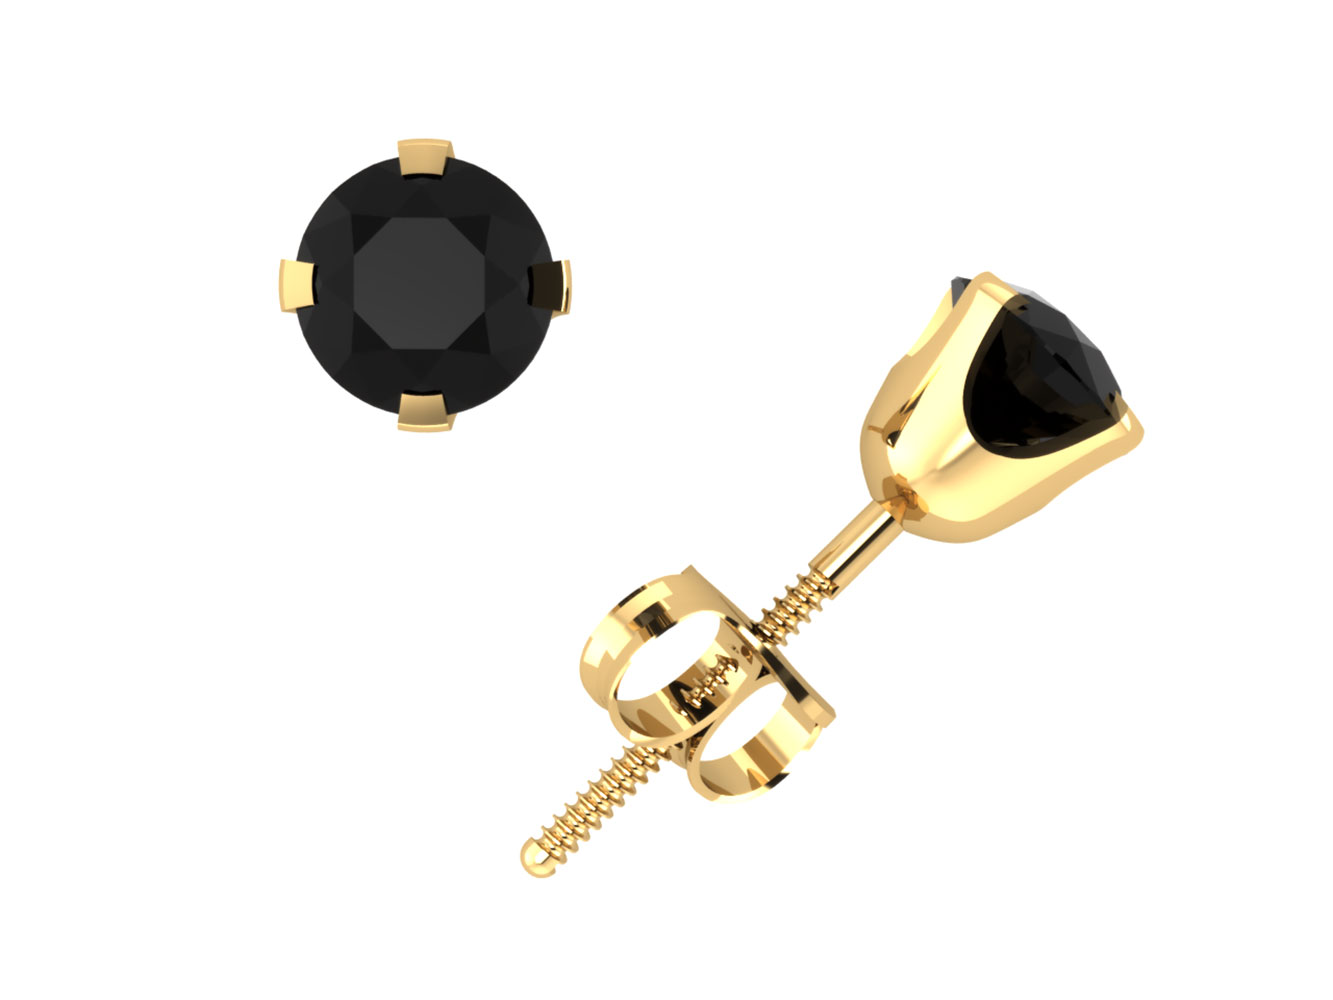 Jewel We Sell Natural 1/2Ct Round Cut Black Diamond Stud Earrings 14k White or Yellow Gold 4Prong Set I1